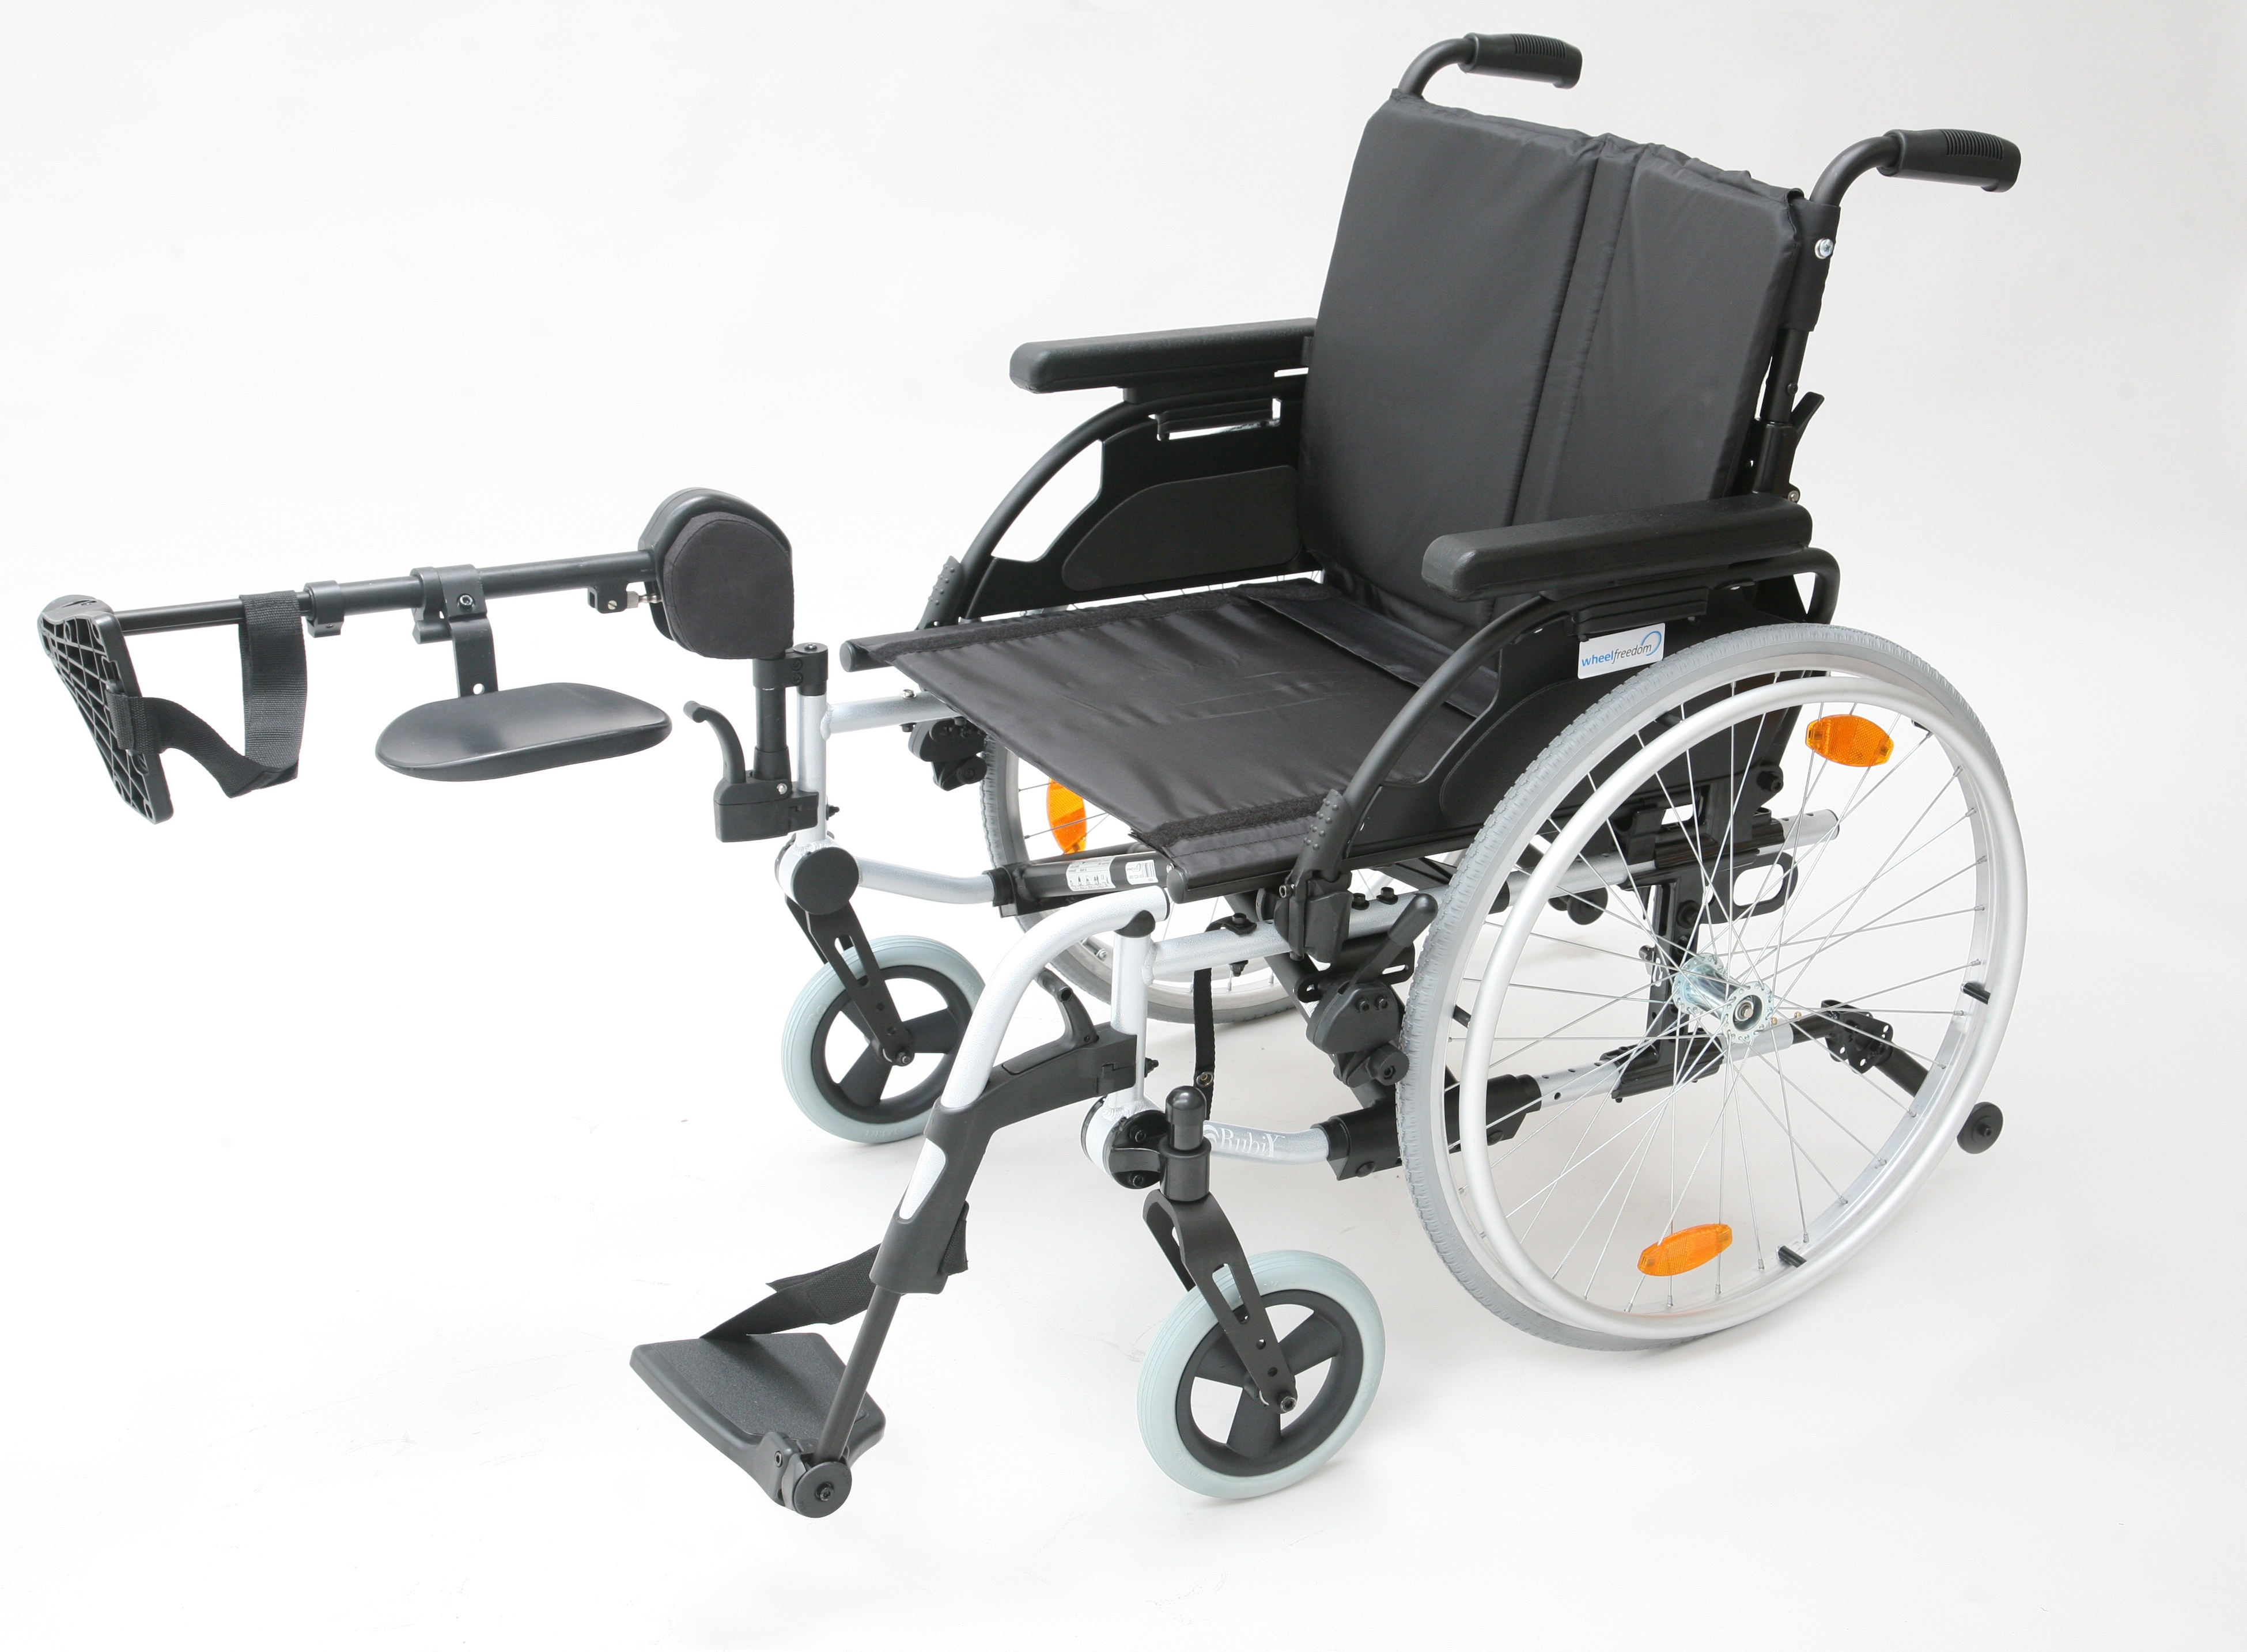 Manual Wheelchair Hire in Exeter - Elevated Leg Rest